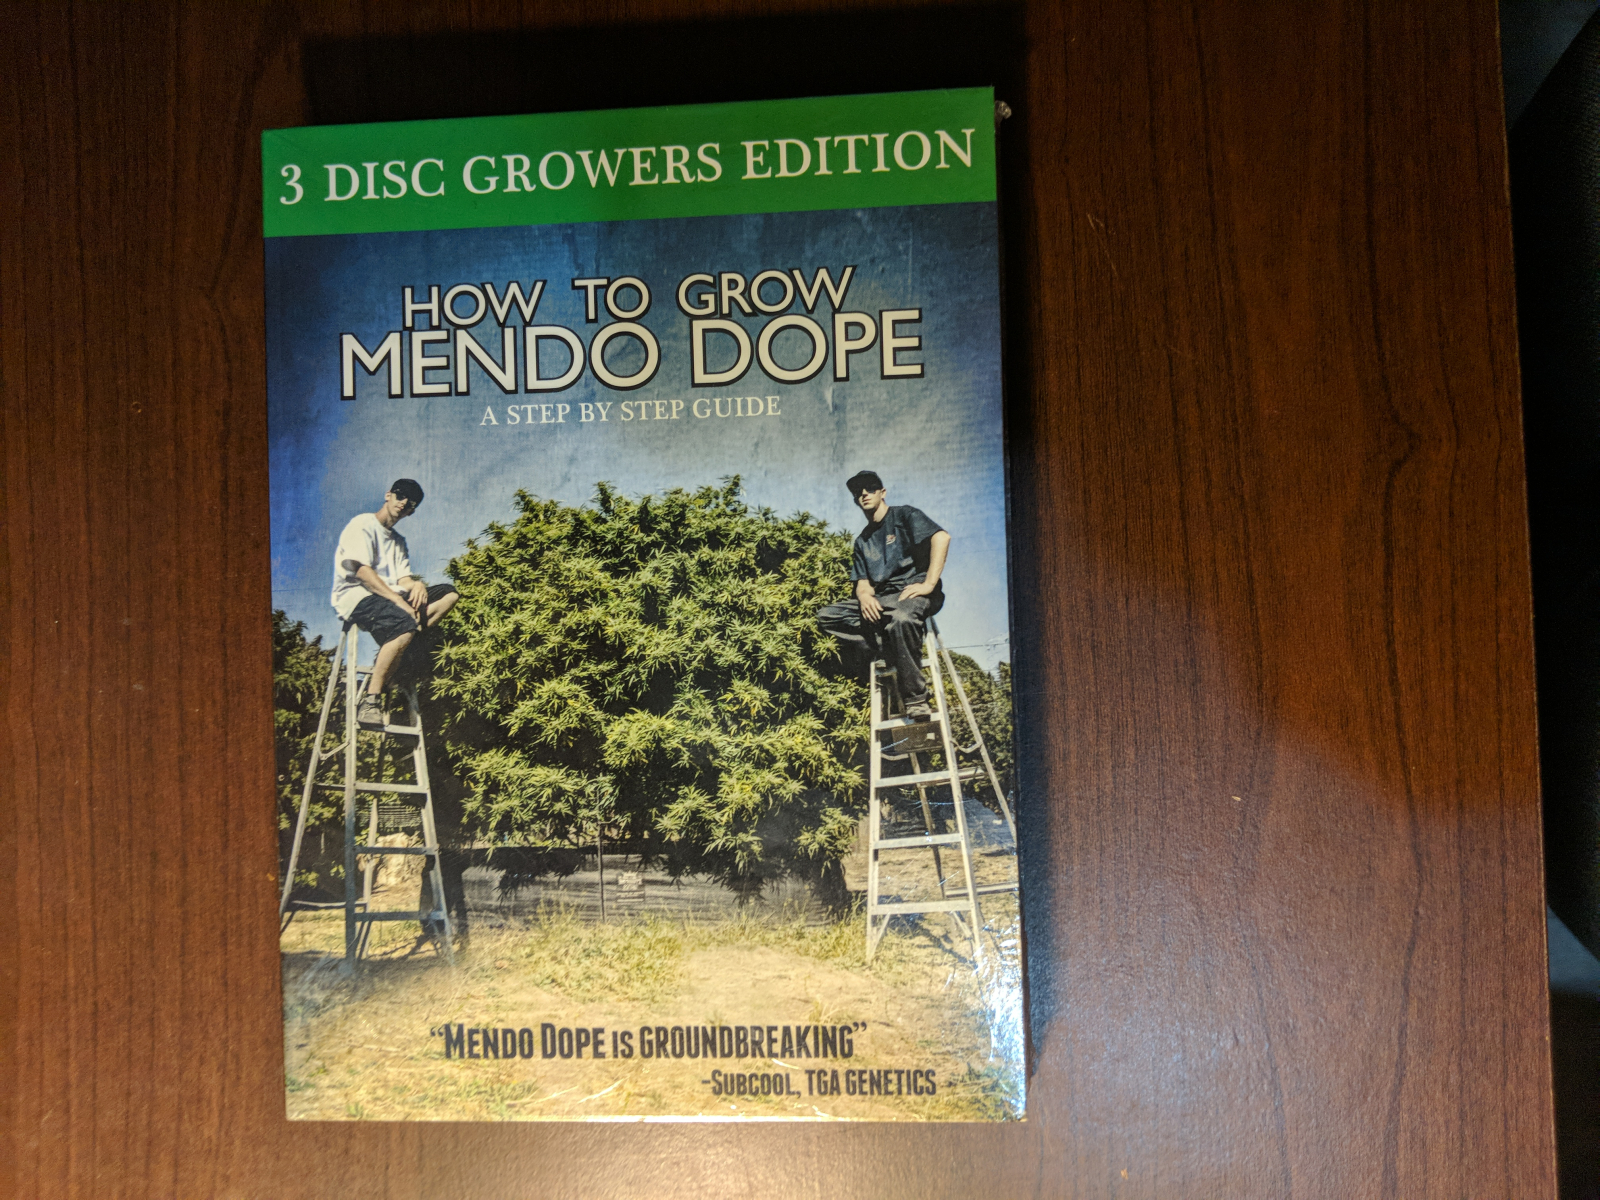 How to grow Mendocino dope 3 disc growers edition dvd